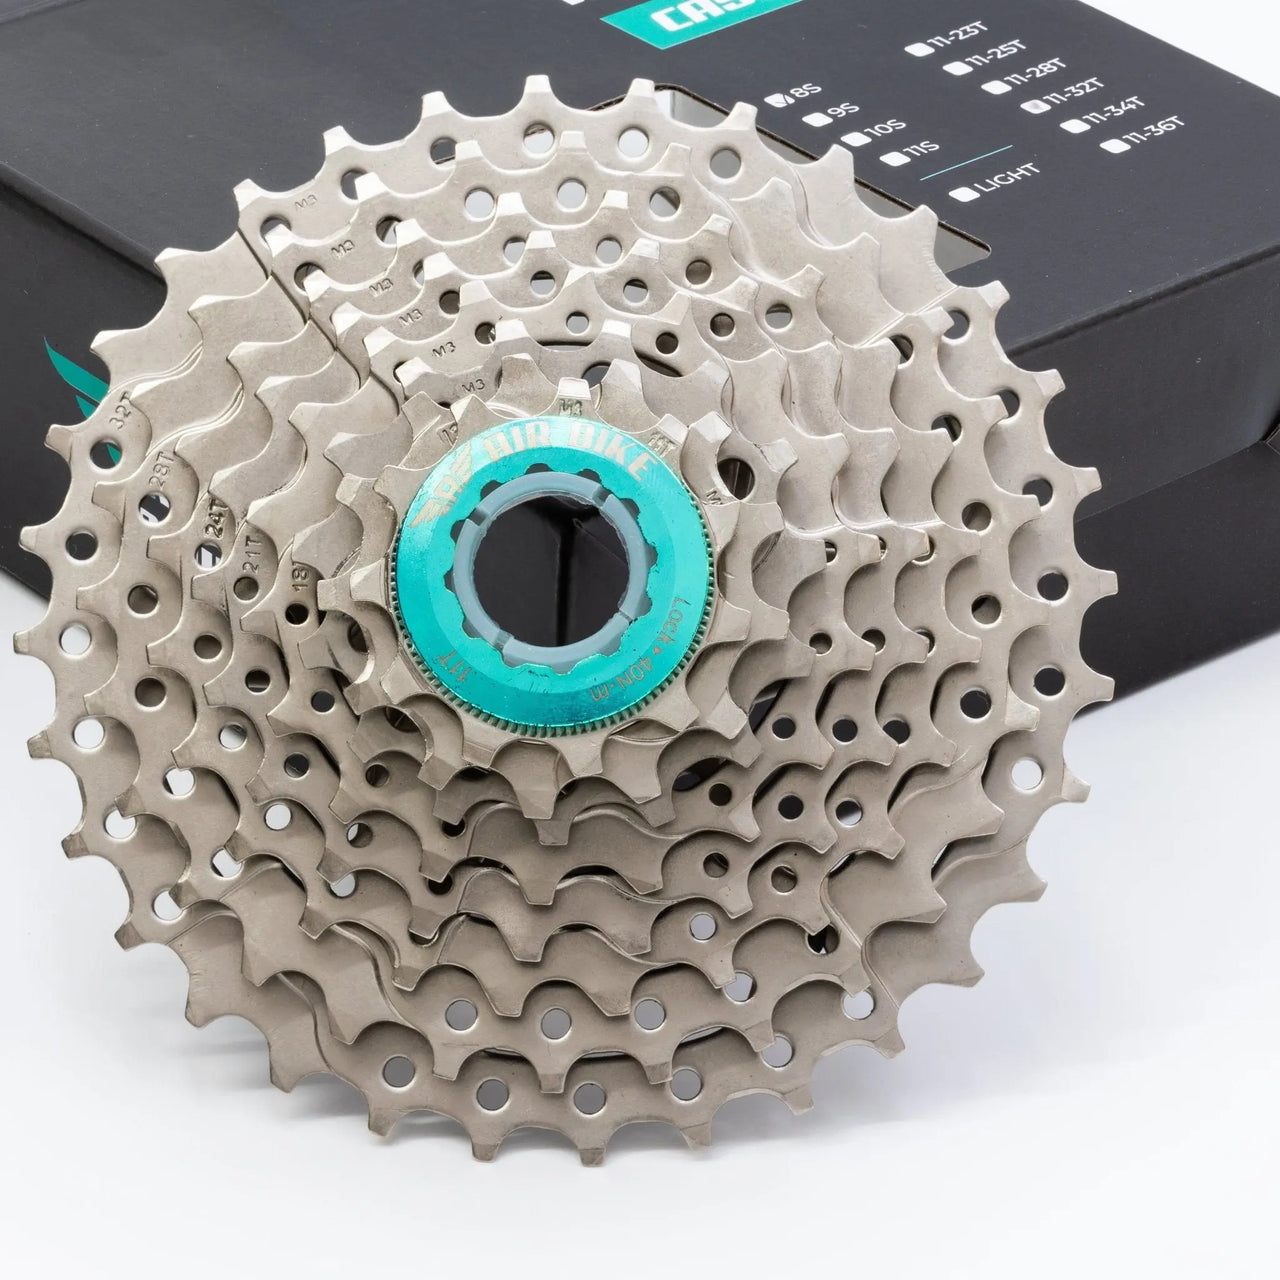 8 Speed 11-32T Cassette For Mountain Bike MTB & Road fits Shimano/Sram - Air BikeBicycle Cassettes & Freewheels